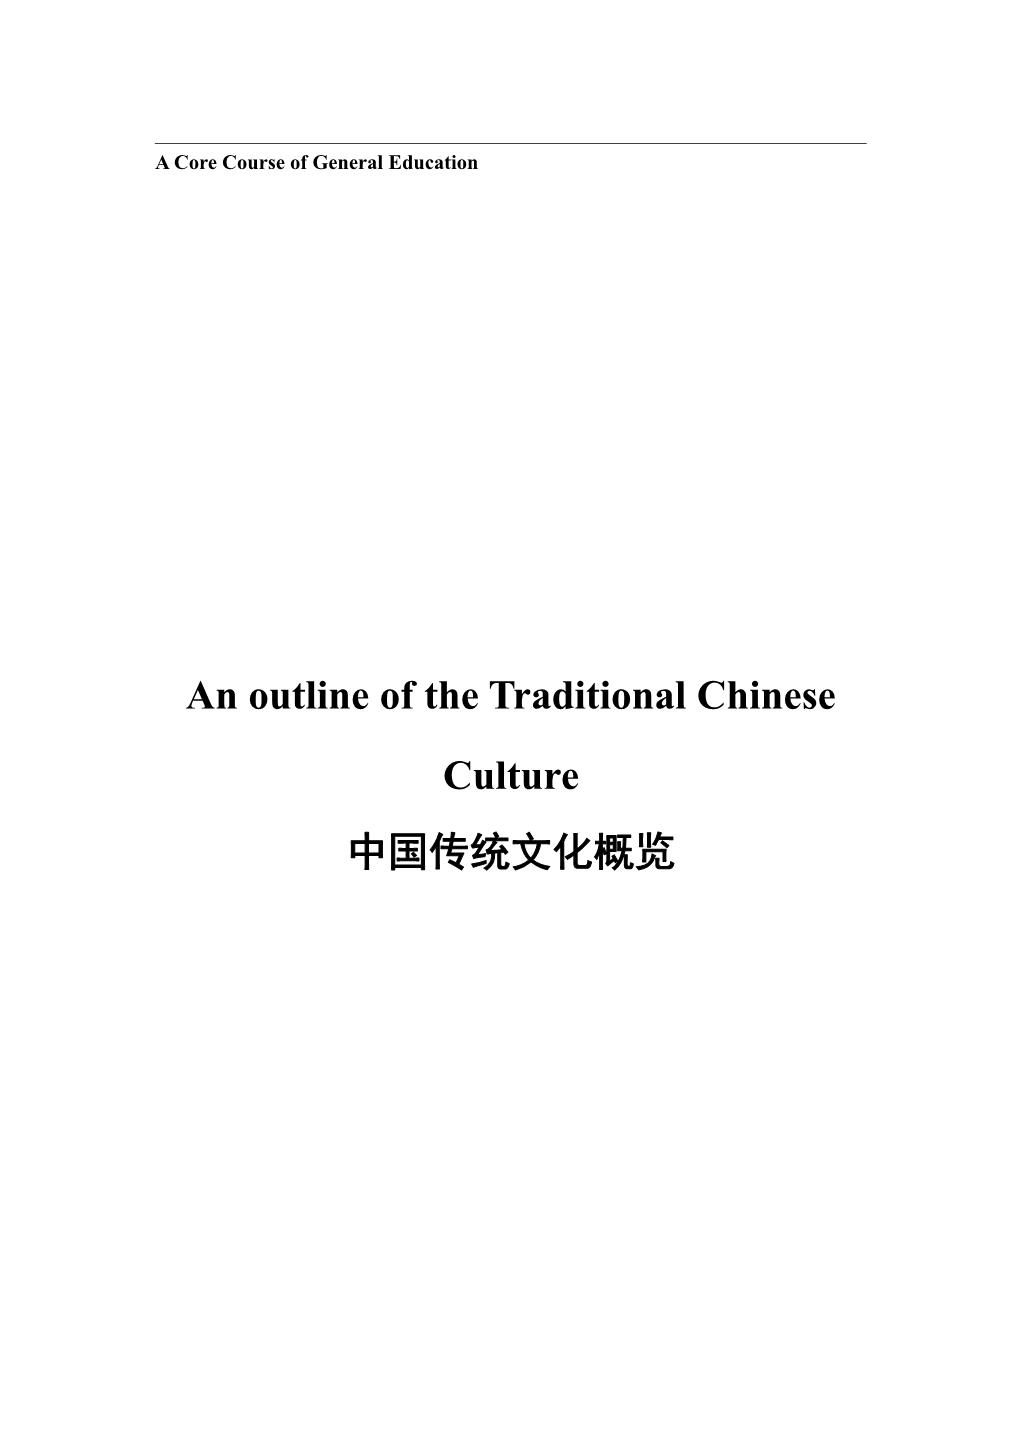 An Outline of the Traditional Chinese Culture